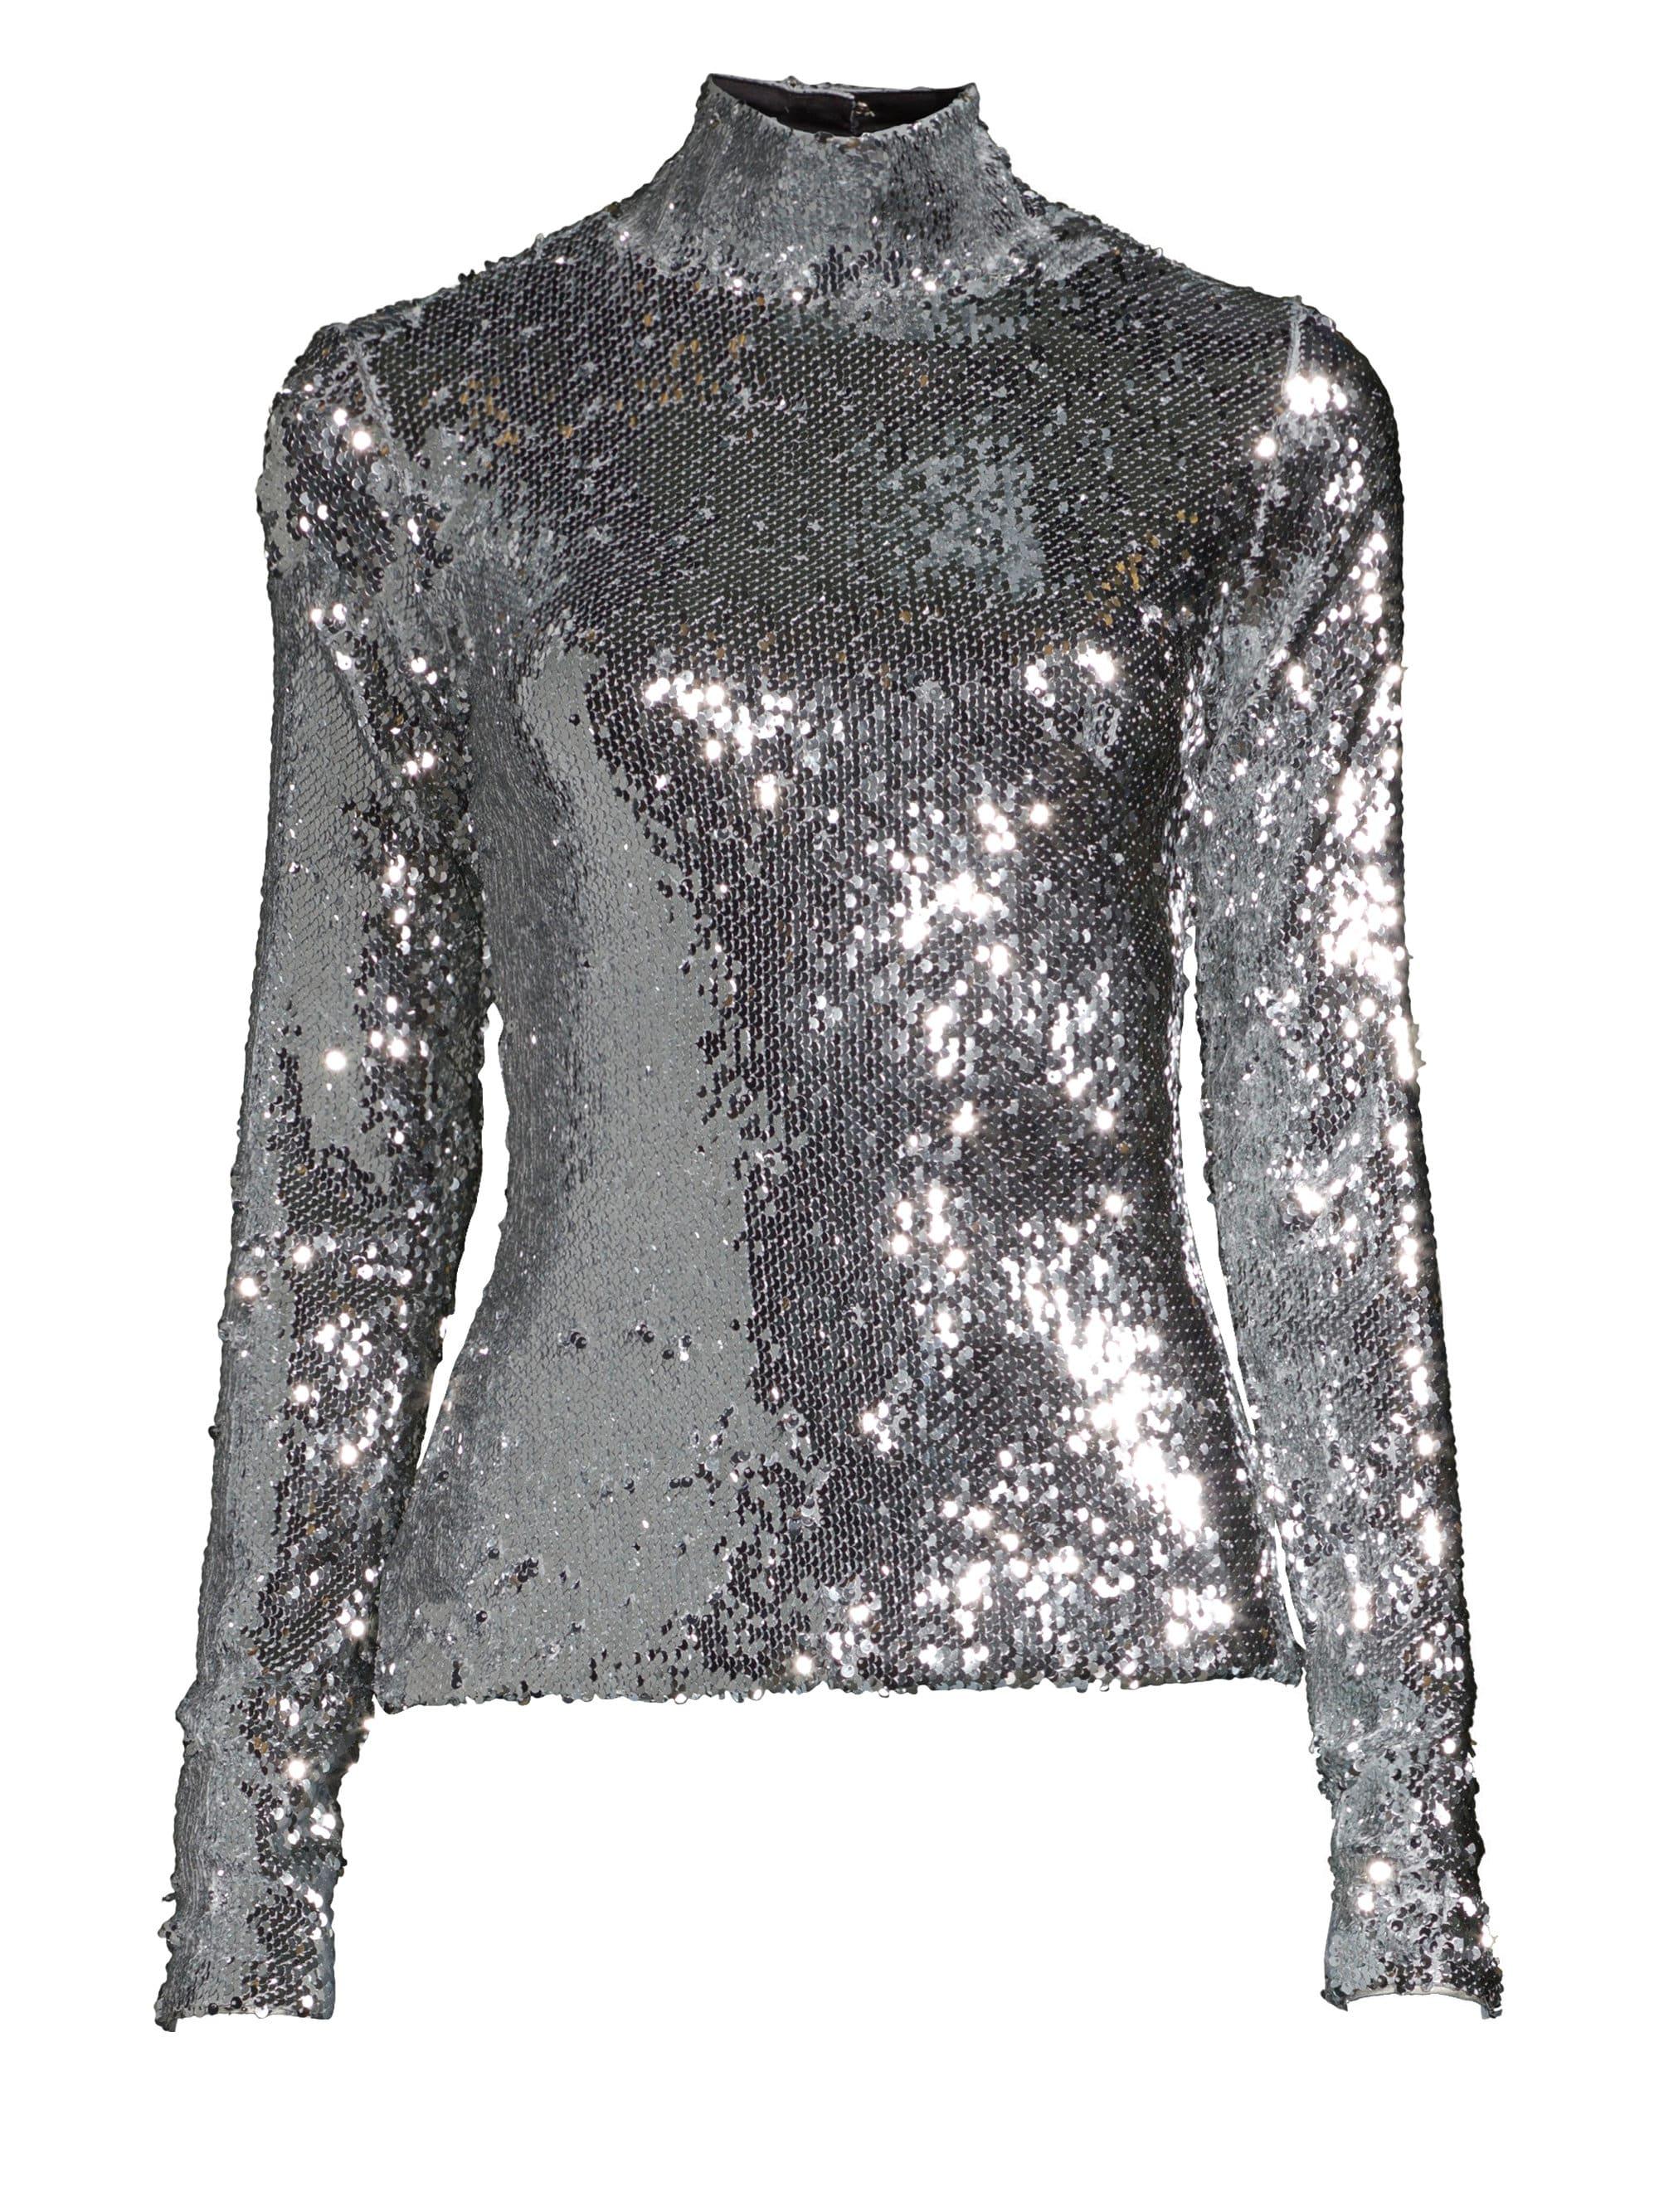 MILLY Synthetic Sequins Turtleneck Sweater in Silver (Metallic) - Lyst